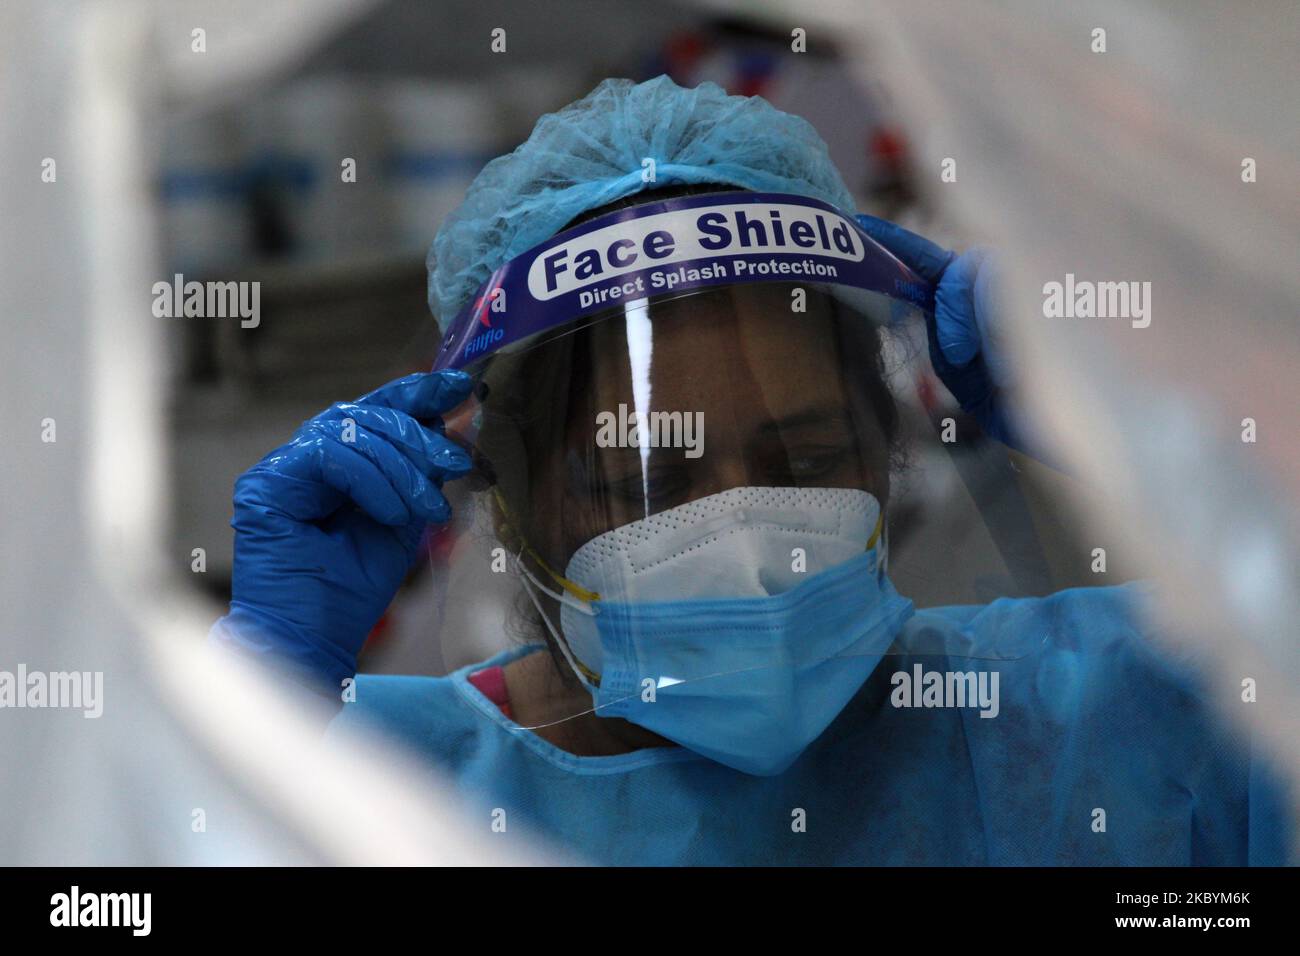 A health worker covered in Personal Protective equipment during nasal swab sample collection from a patient for corona virus Rapid Antigen Testing (RAT), at Nehru Homoeopathic Medical College and Hospital, Defence Colony on September 12, 2020 in New Delhi. With the highest single-day spike of 97,570 new cases and 1,201 deaths reported in the last 24 hours, India's Covid-19 count crossed the 46-lakh mark today. According to the health ministry, the Covid-19 case tally stands at 46,59,984 in the country. (Photo by Mayank Makhija/NurPhoto) Stock Photo